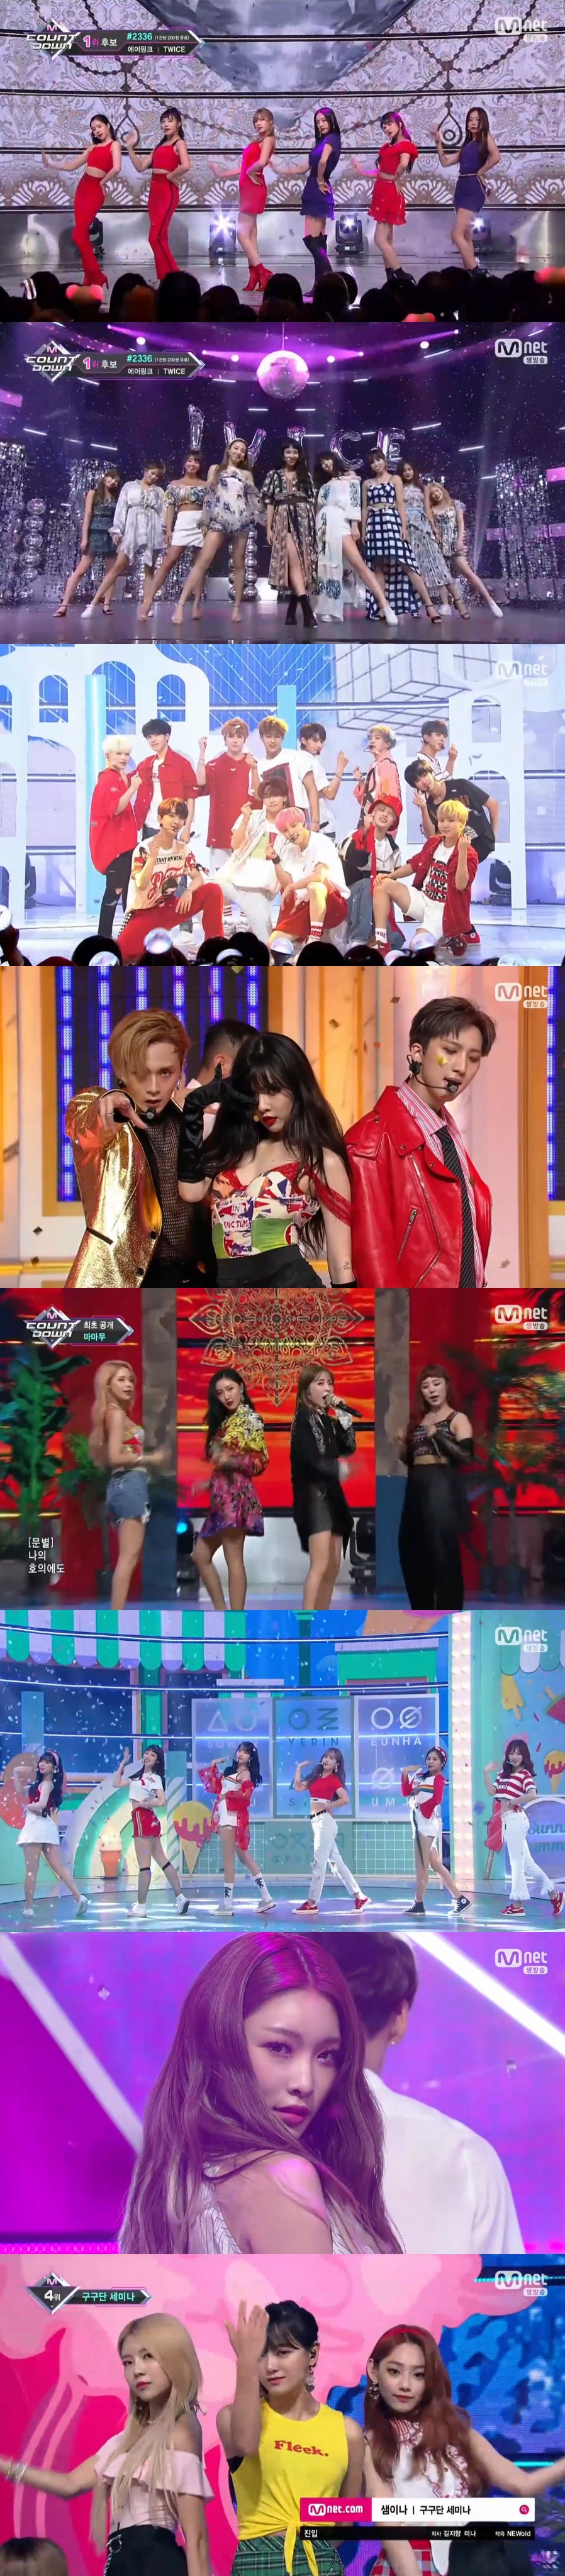 TWICE topped M CountdowndownMnets M Countdowndown aired on July 19 was nominated for the top spot by Apex No 1 and TWICE Dance The Night Away.The third week of July was TWICE.Dance The Night Away, released on the 9th, is an uptempo pop song expressing the youth of TWICE, which has a special happiness.TWICE The first summer song to be presented is impressive with cool and bright energy.The first five teams to be released on M Countdown were Seventeen, MAMAMOO, girlfriend, Cheongha and Triple H.Cheongha presented the title song Love U and the song BB, and the eventeen presented the title song Whats the Happening and the song Our Dawn is Hotter than Day, and MAMAMOO presented the title song You Na Year and the song Sleeping, and the girlfriend showed the title song Summer Year.Triple H (Hyun-ah, Hui, Ethan) was also impressive with the title song Retro Future.There were also many welcome stages that were first released through M Countdown for two weeks.A Pinks No 1 returned to deadly maturity, TWICEs Dance the Night Away with a refreshing charm, and a youthful ball club seminar Samina caught the eye.In the third week of July, TOP10 was TWICE, Gugudan Seminar, A Pink, Momo Land, Account, Promis Nine, Golden Child, U & B, Kim Dong Han and Ace.On the other hand, M Countdown Down Down is accounting, Golden Child, Gugudan Seminar, Kim Dong Han, MAMAMOO, Mightyn, Momo Land and Basita.Seventeen, Shin Hyun Hee and Kim Root, Ace, A Pink, Alice, Girlfriend, On & Off, Cheongha, Target, Triple H, TWICE, Promis Ninesulphur-su-yeon